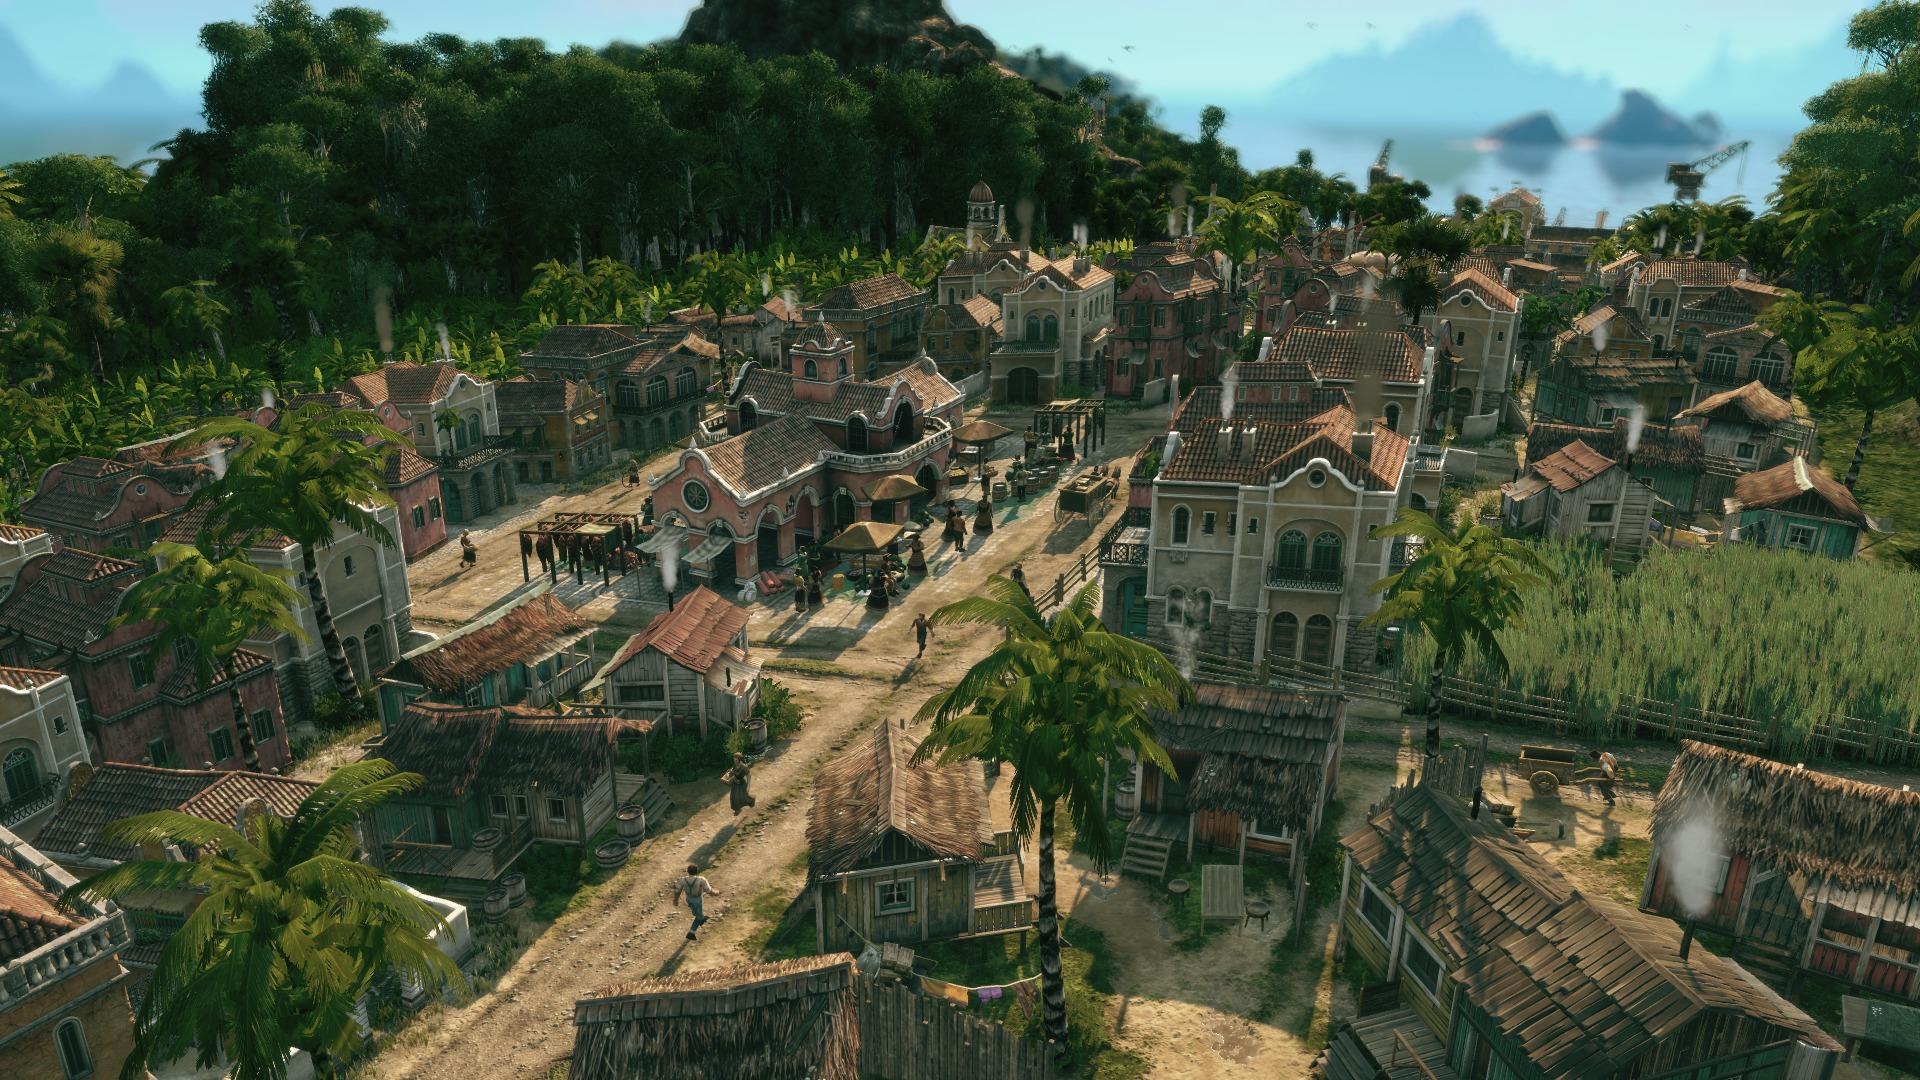 Anno the city building wonder! What's new?